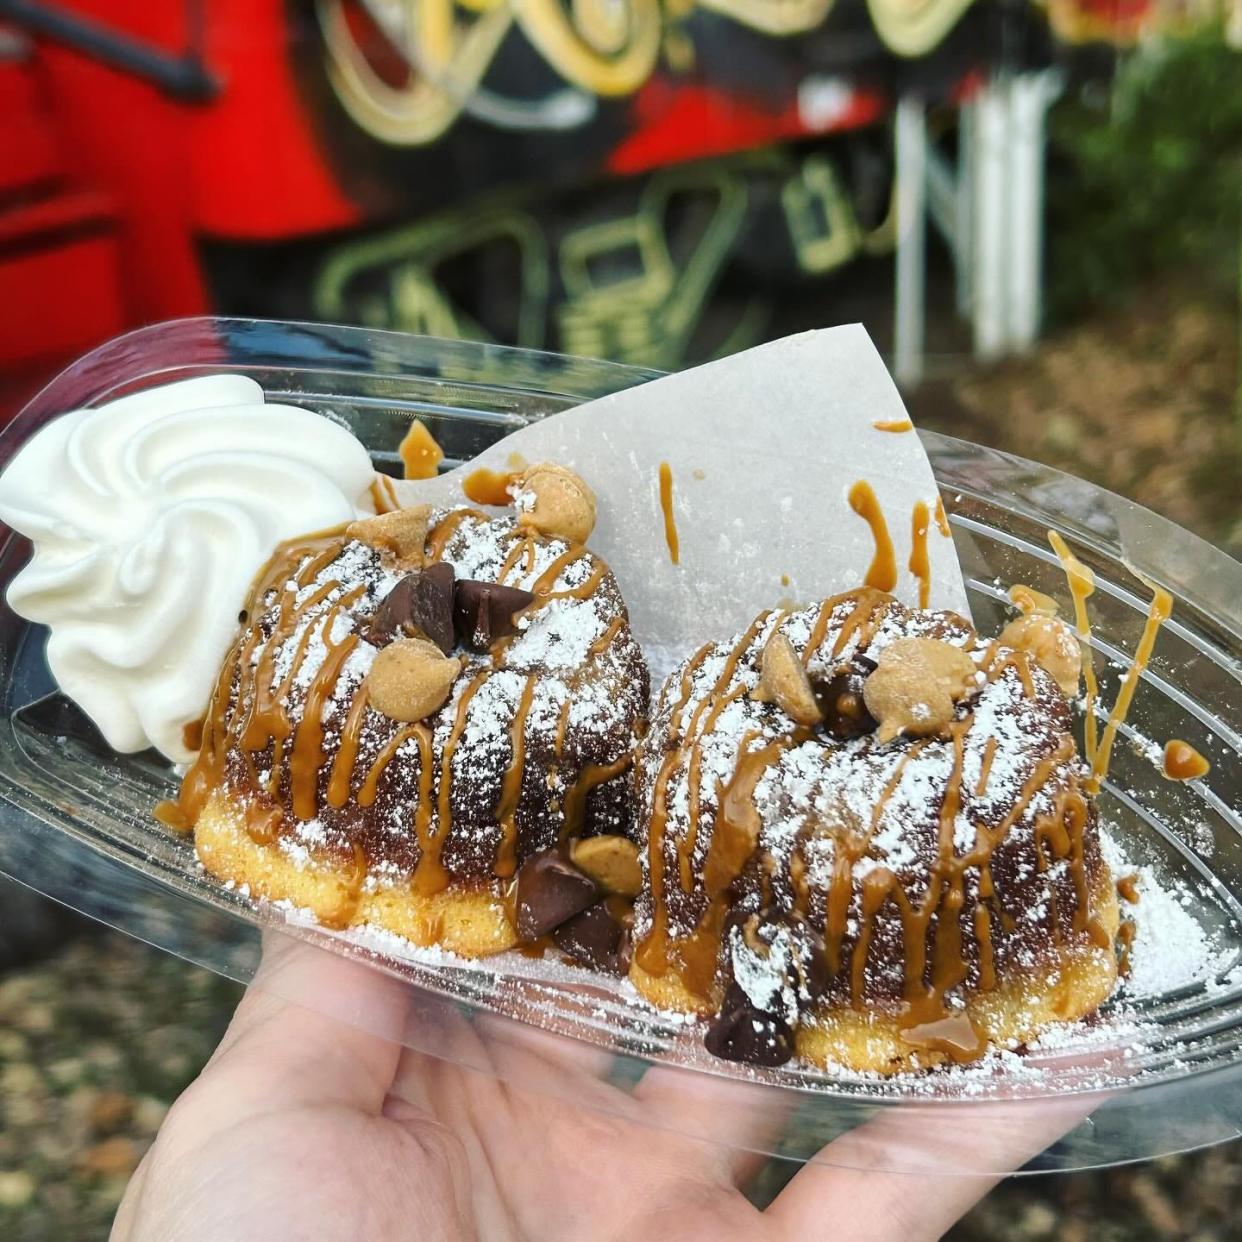 The Reese’s Hot Bite at Sweet Boozy Cakes is a warm peanut butter cake speckled with chocolate and peanut butter chips.